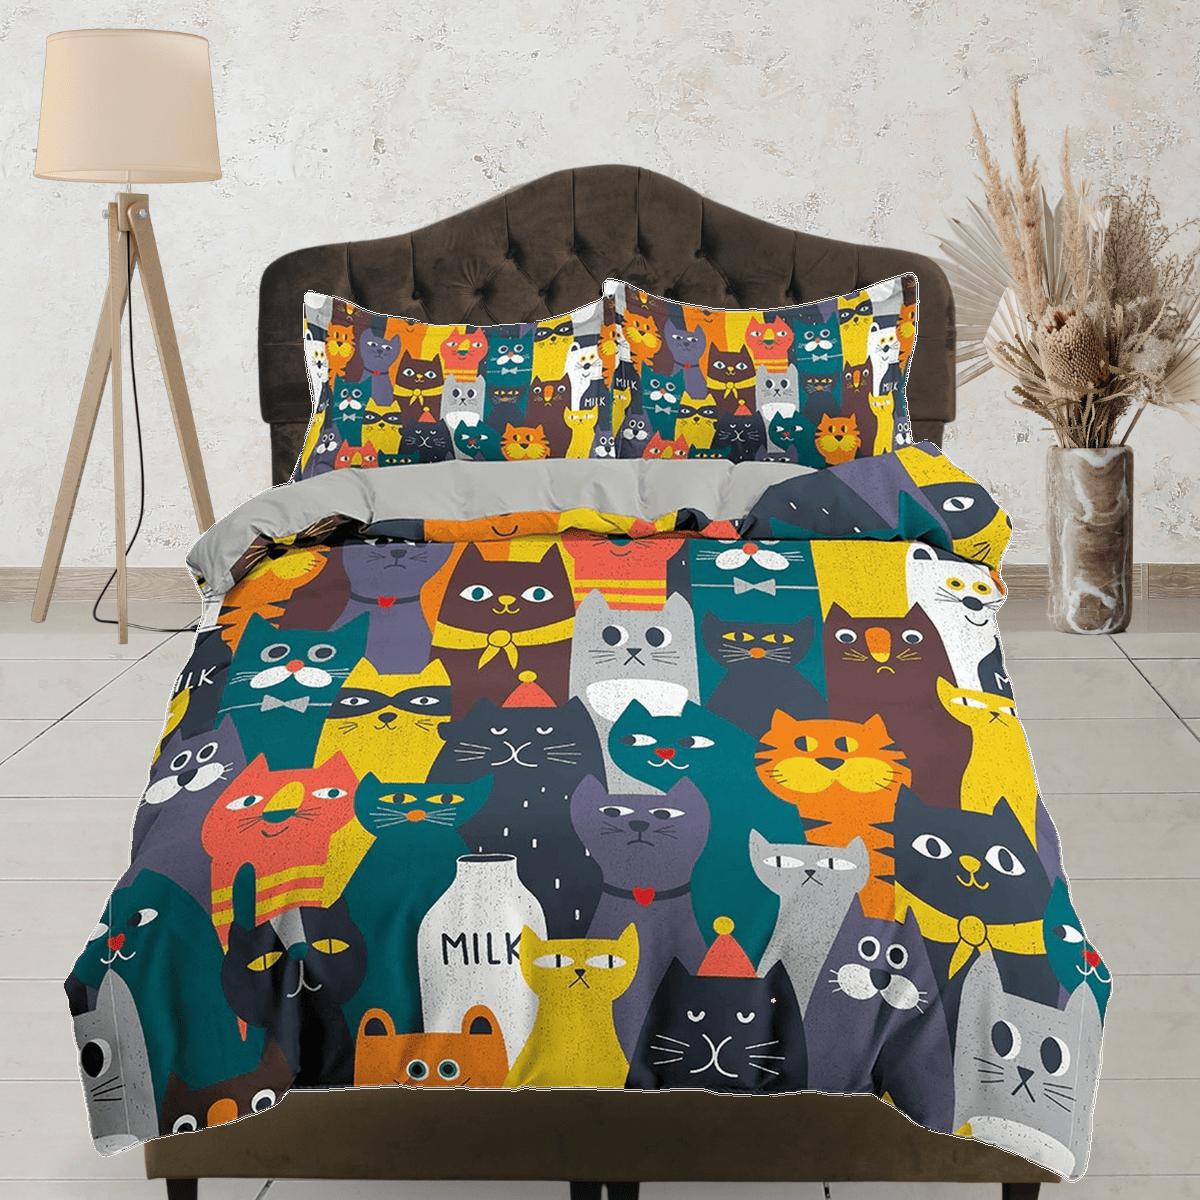 daintyduvet Colorful cats toddler bedding, unique duvet cover for nursery kids, crib bedding for cat lovers, baby zipper bedding, king queen full twin